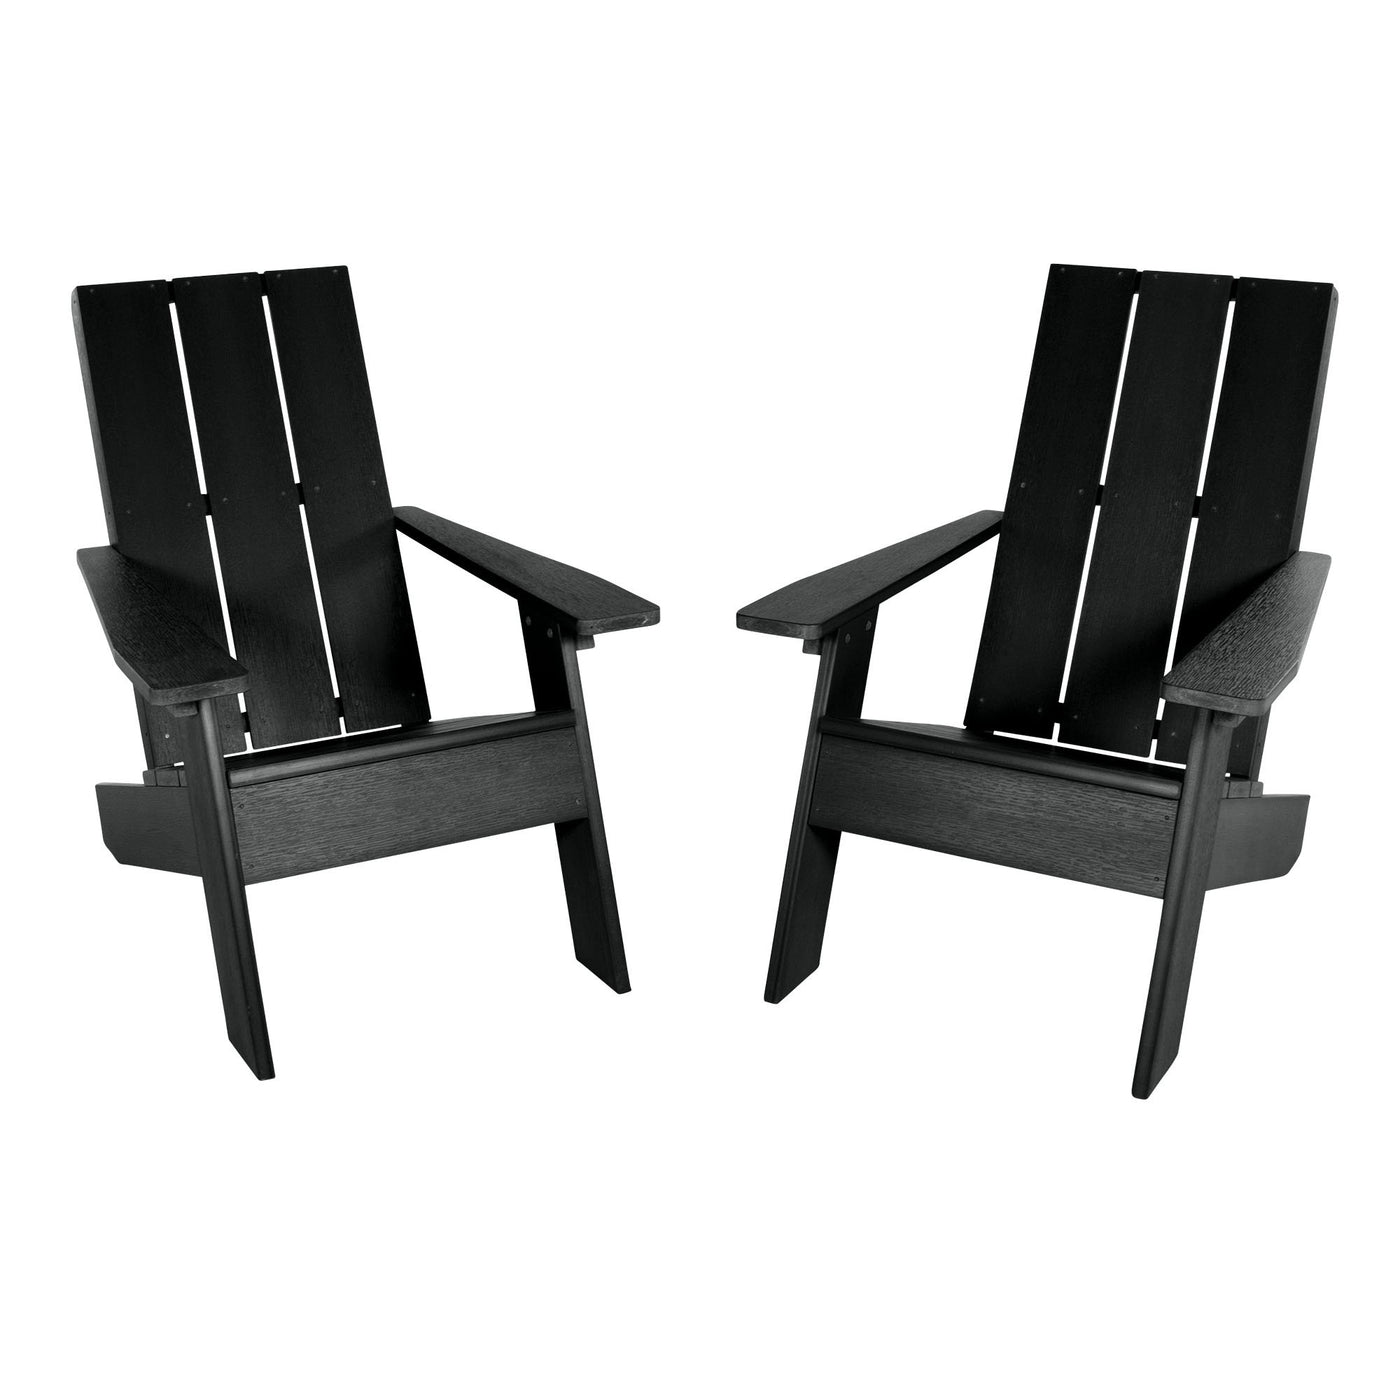 Two Italica Adirondack chairs in Black